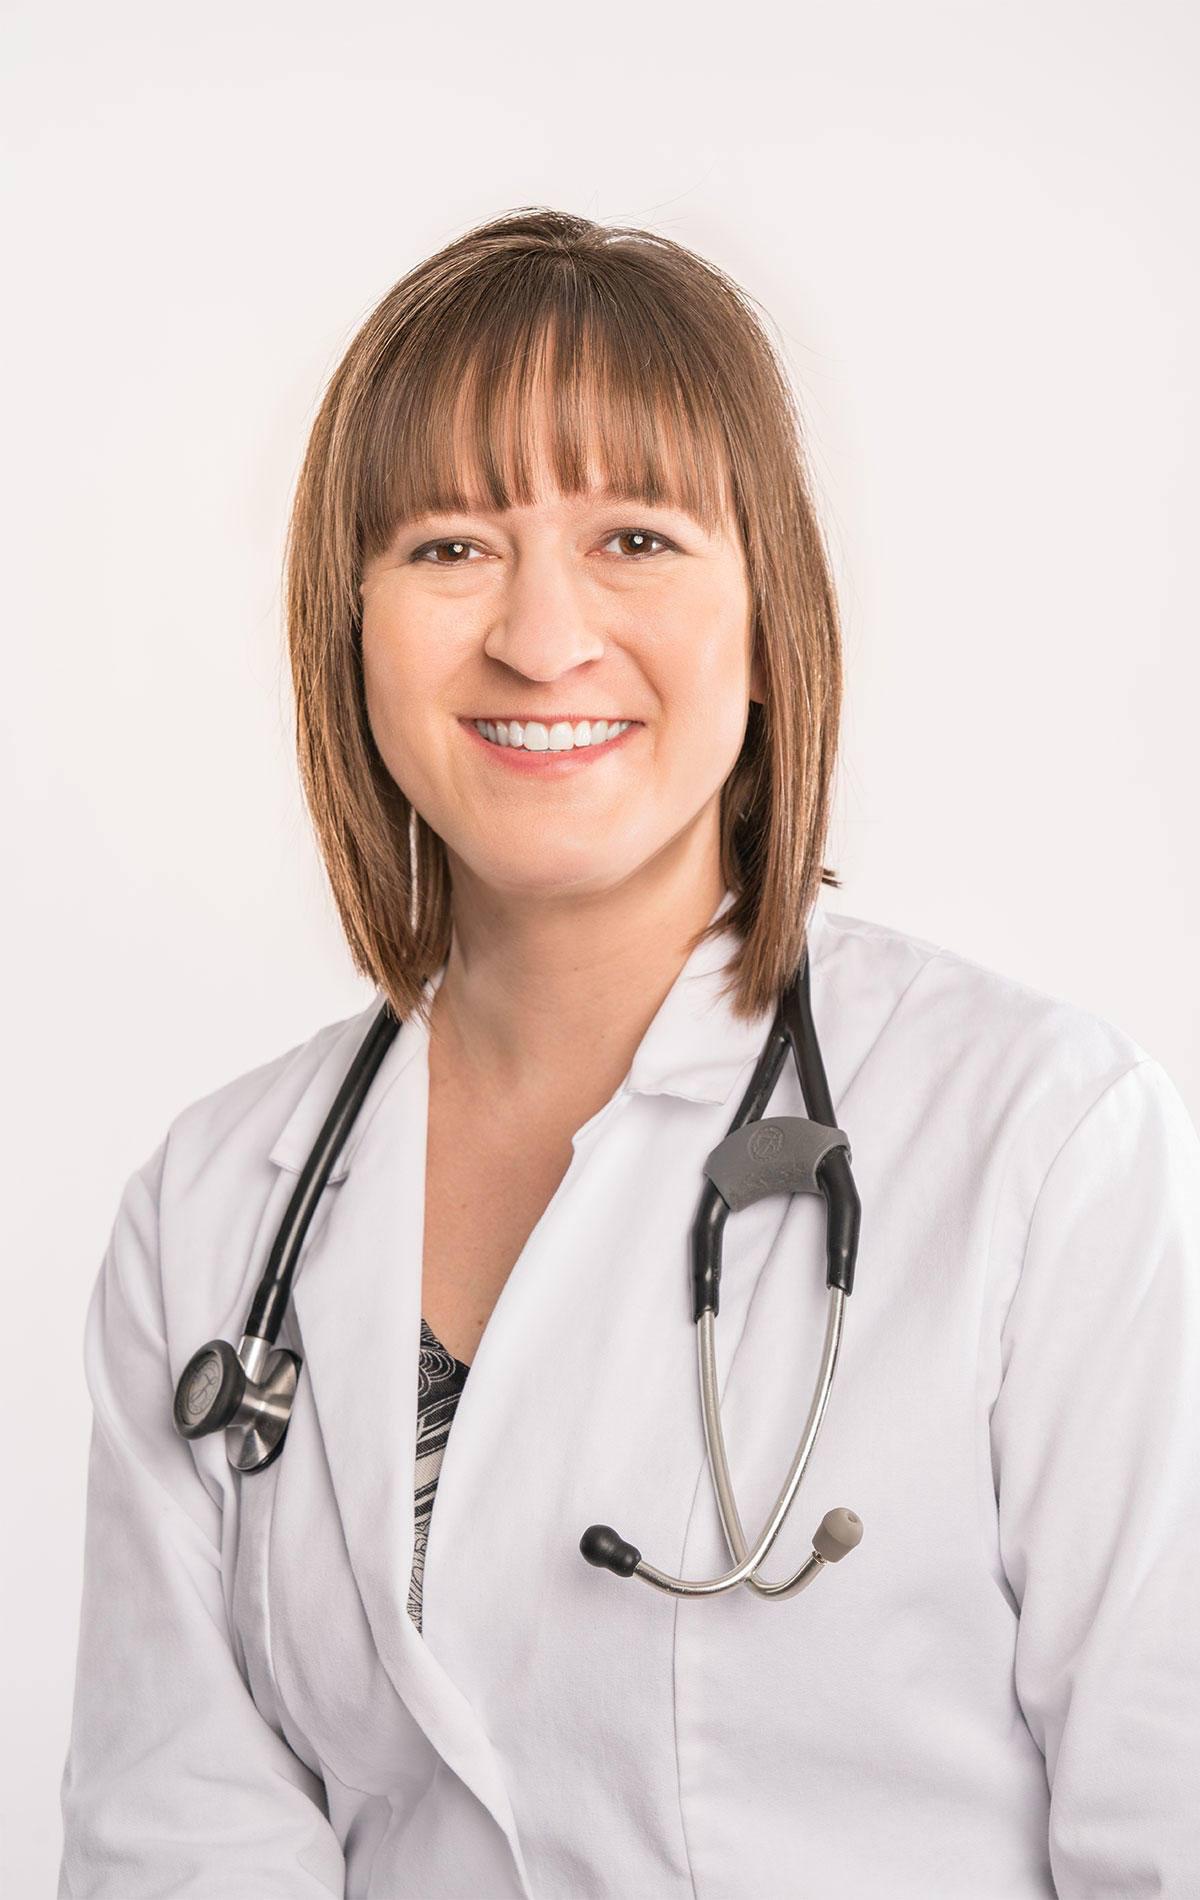 Dr. Amy Haarstad is the owner and operator of Haarstad Veterinary Dermatology. She provides specialized veterinary allergy, skin, and ear care to your pets.